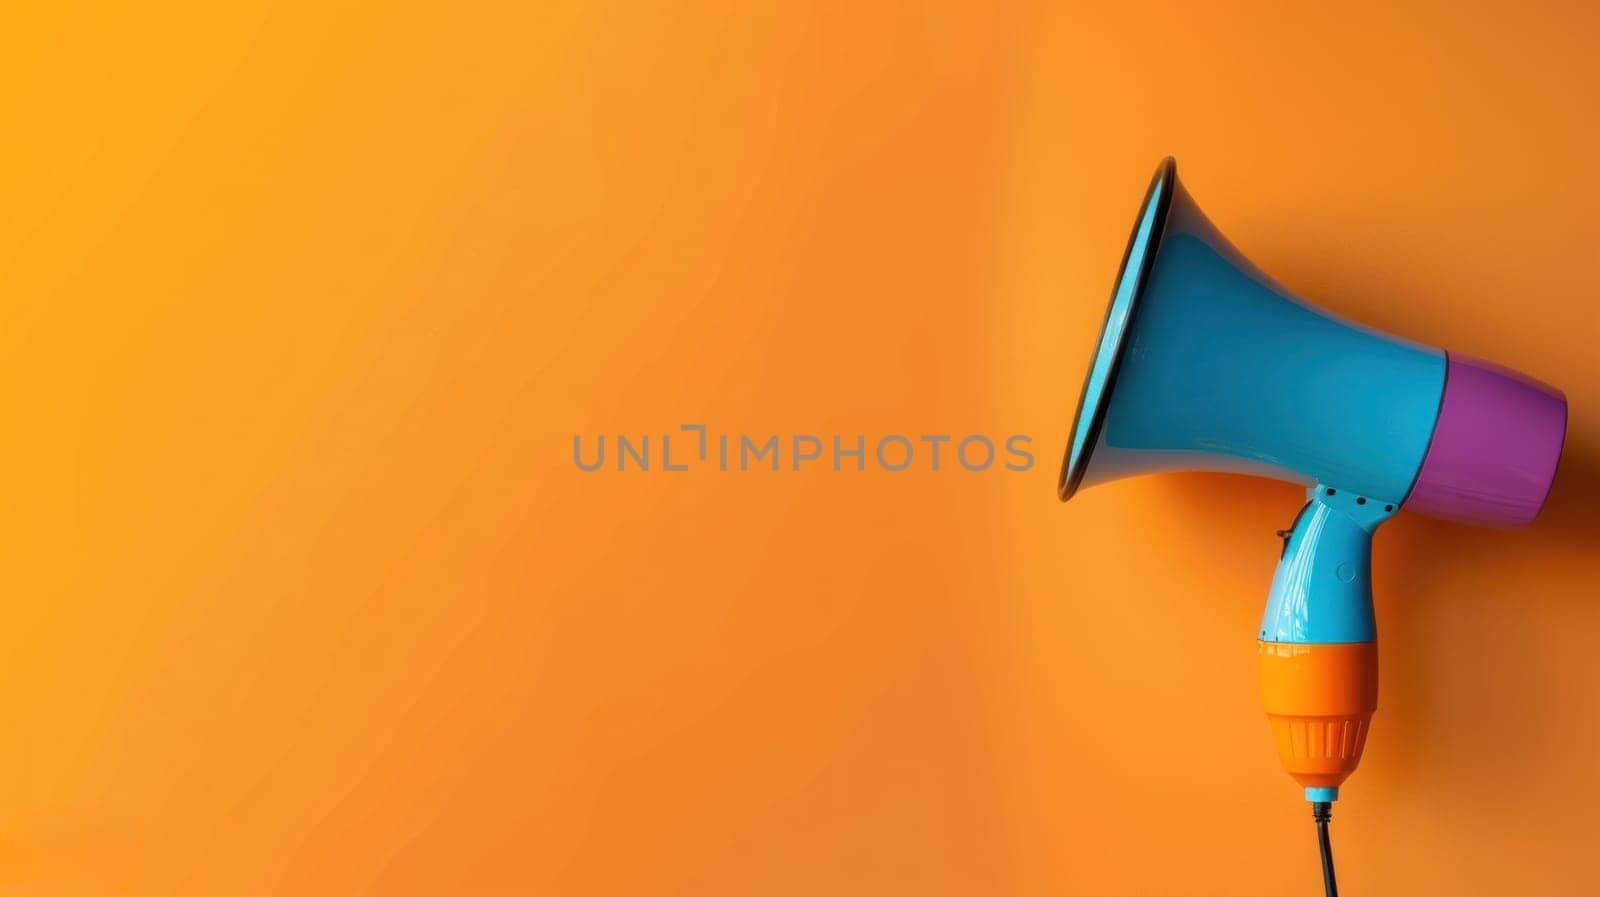 A blue megaphone is on a bright orange background by golfmerrymaker